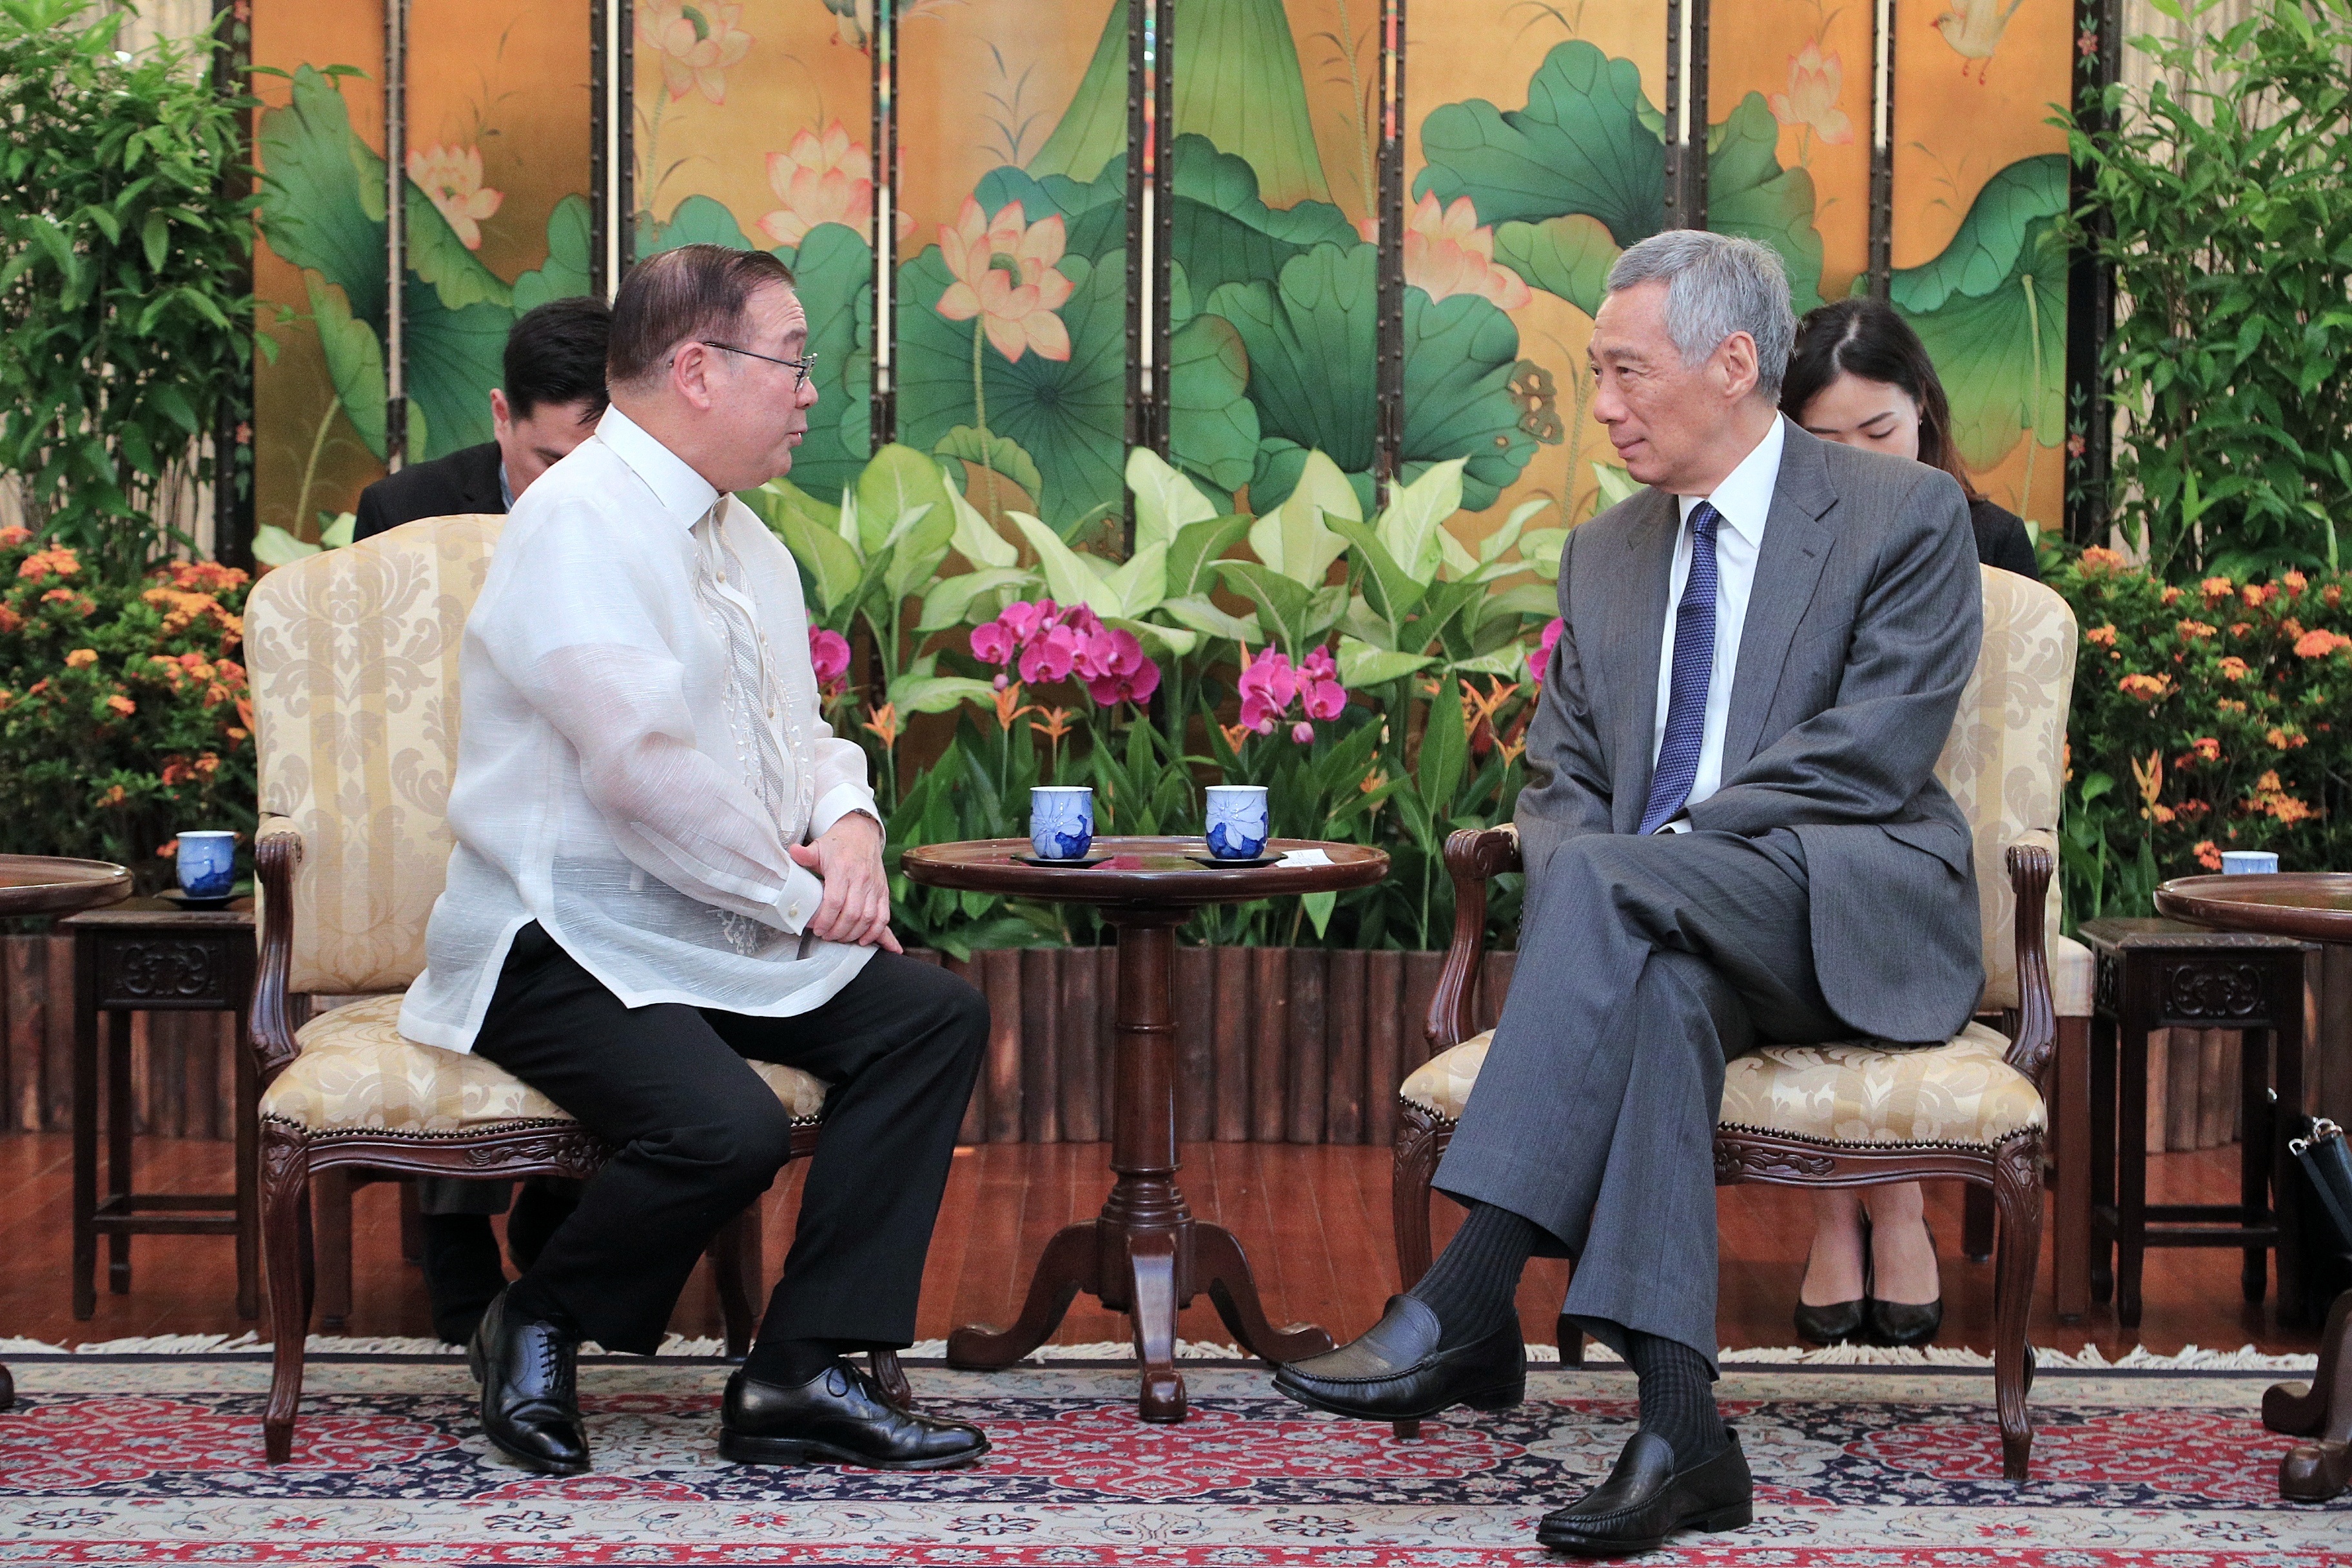 Call by Secretary of Foreign Affairs of the Republic of the Philippines Teodoro L Locsin, Jr. on Prime Minister Lee Hsien Loong, 8 May 2019